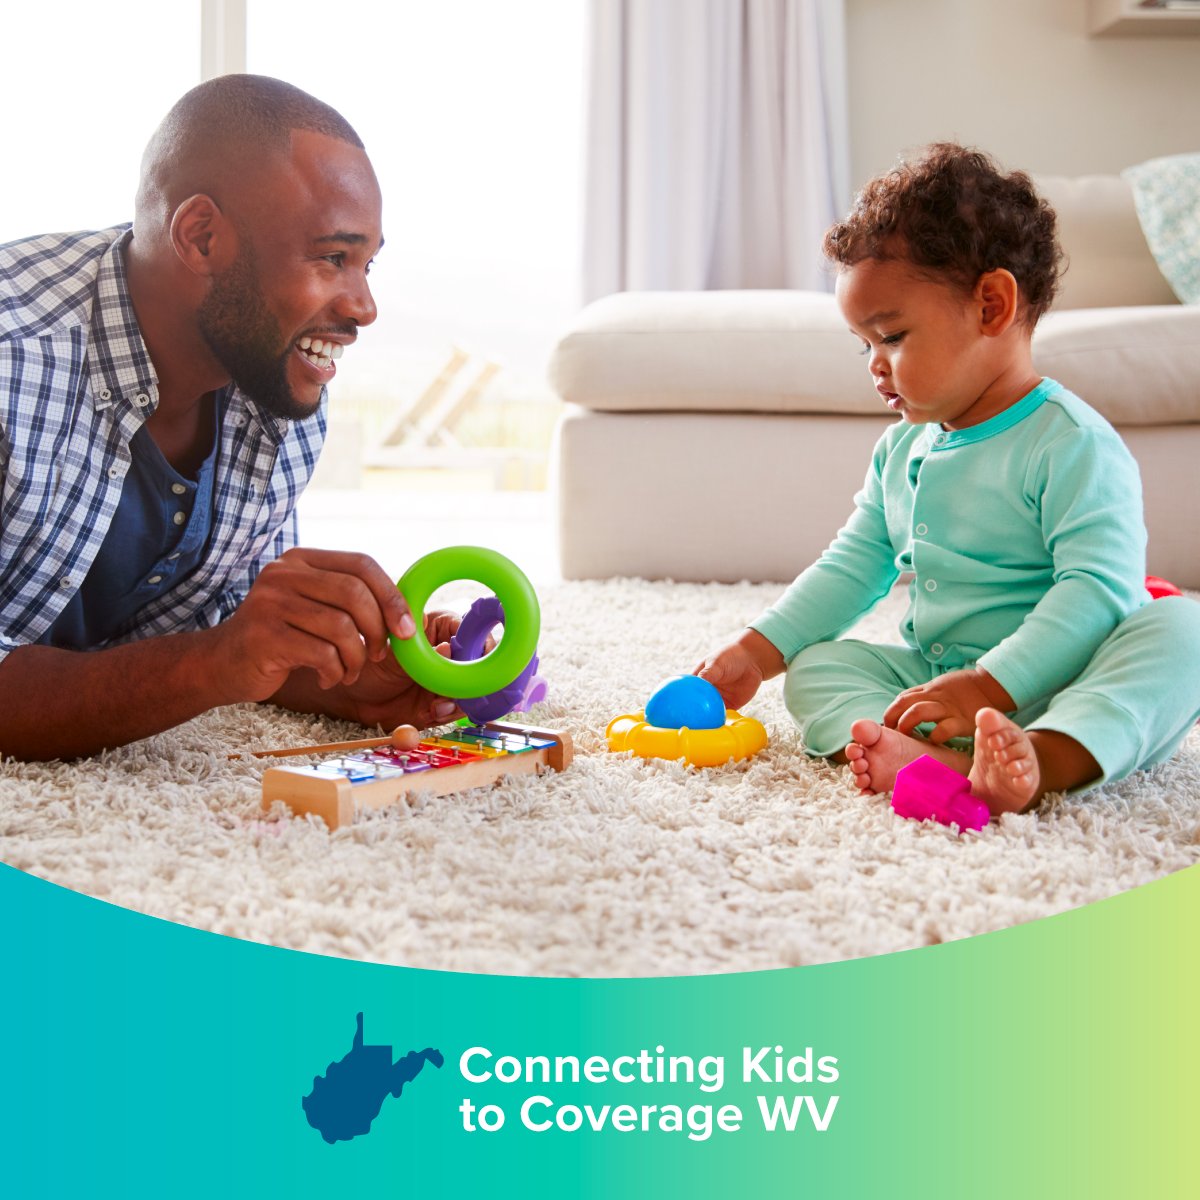 Medicaid and WV CHIP renewals are happening now. Do not share personal information or give money to anyone claiming you have to pay to keep your coverage. Visit connectingkidstocoverage.com for the contact information of organizations that can answer your questions. #KeepKidsCovered